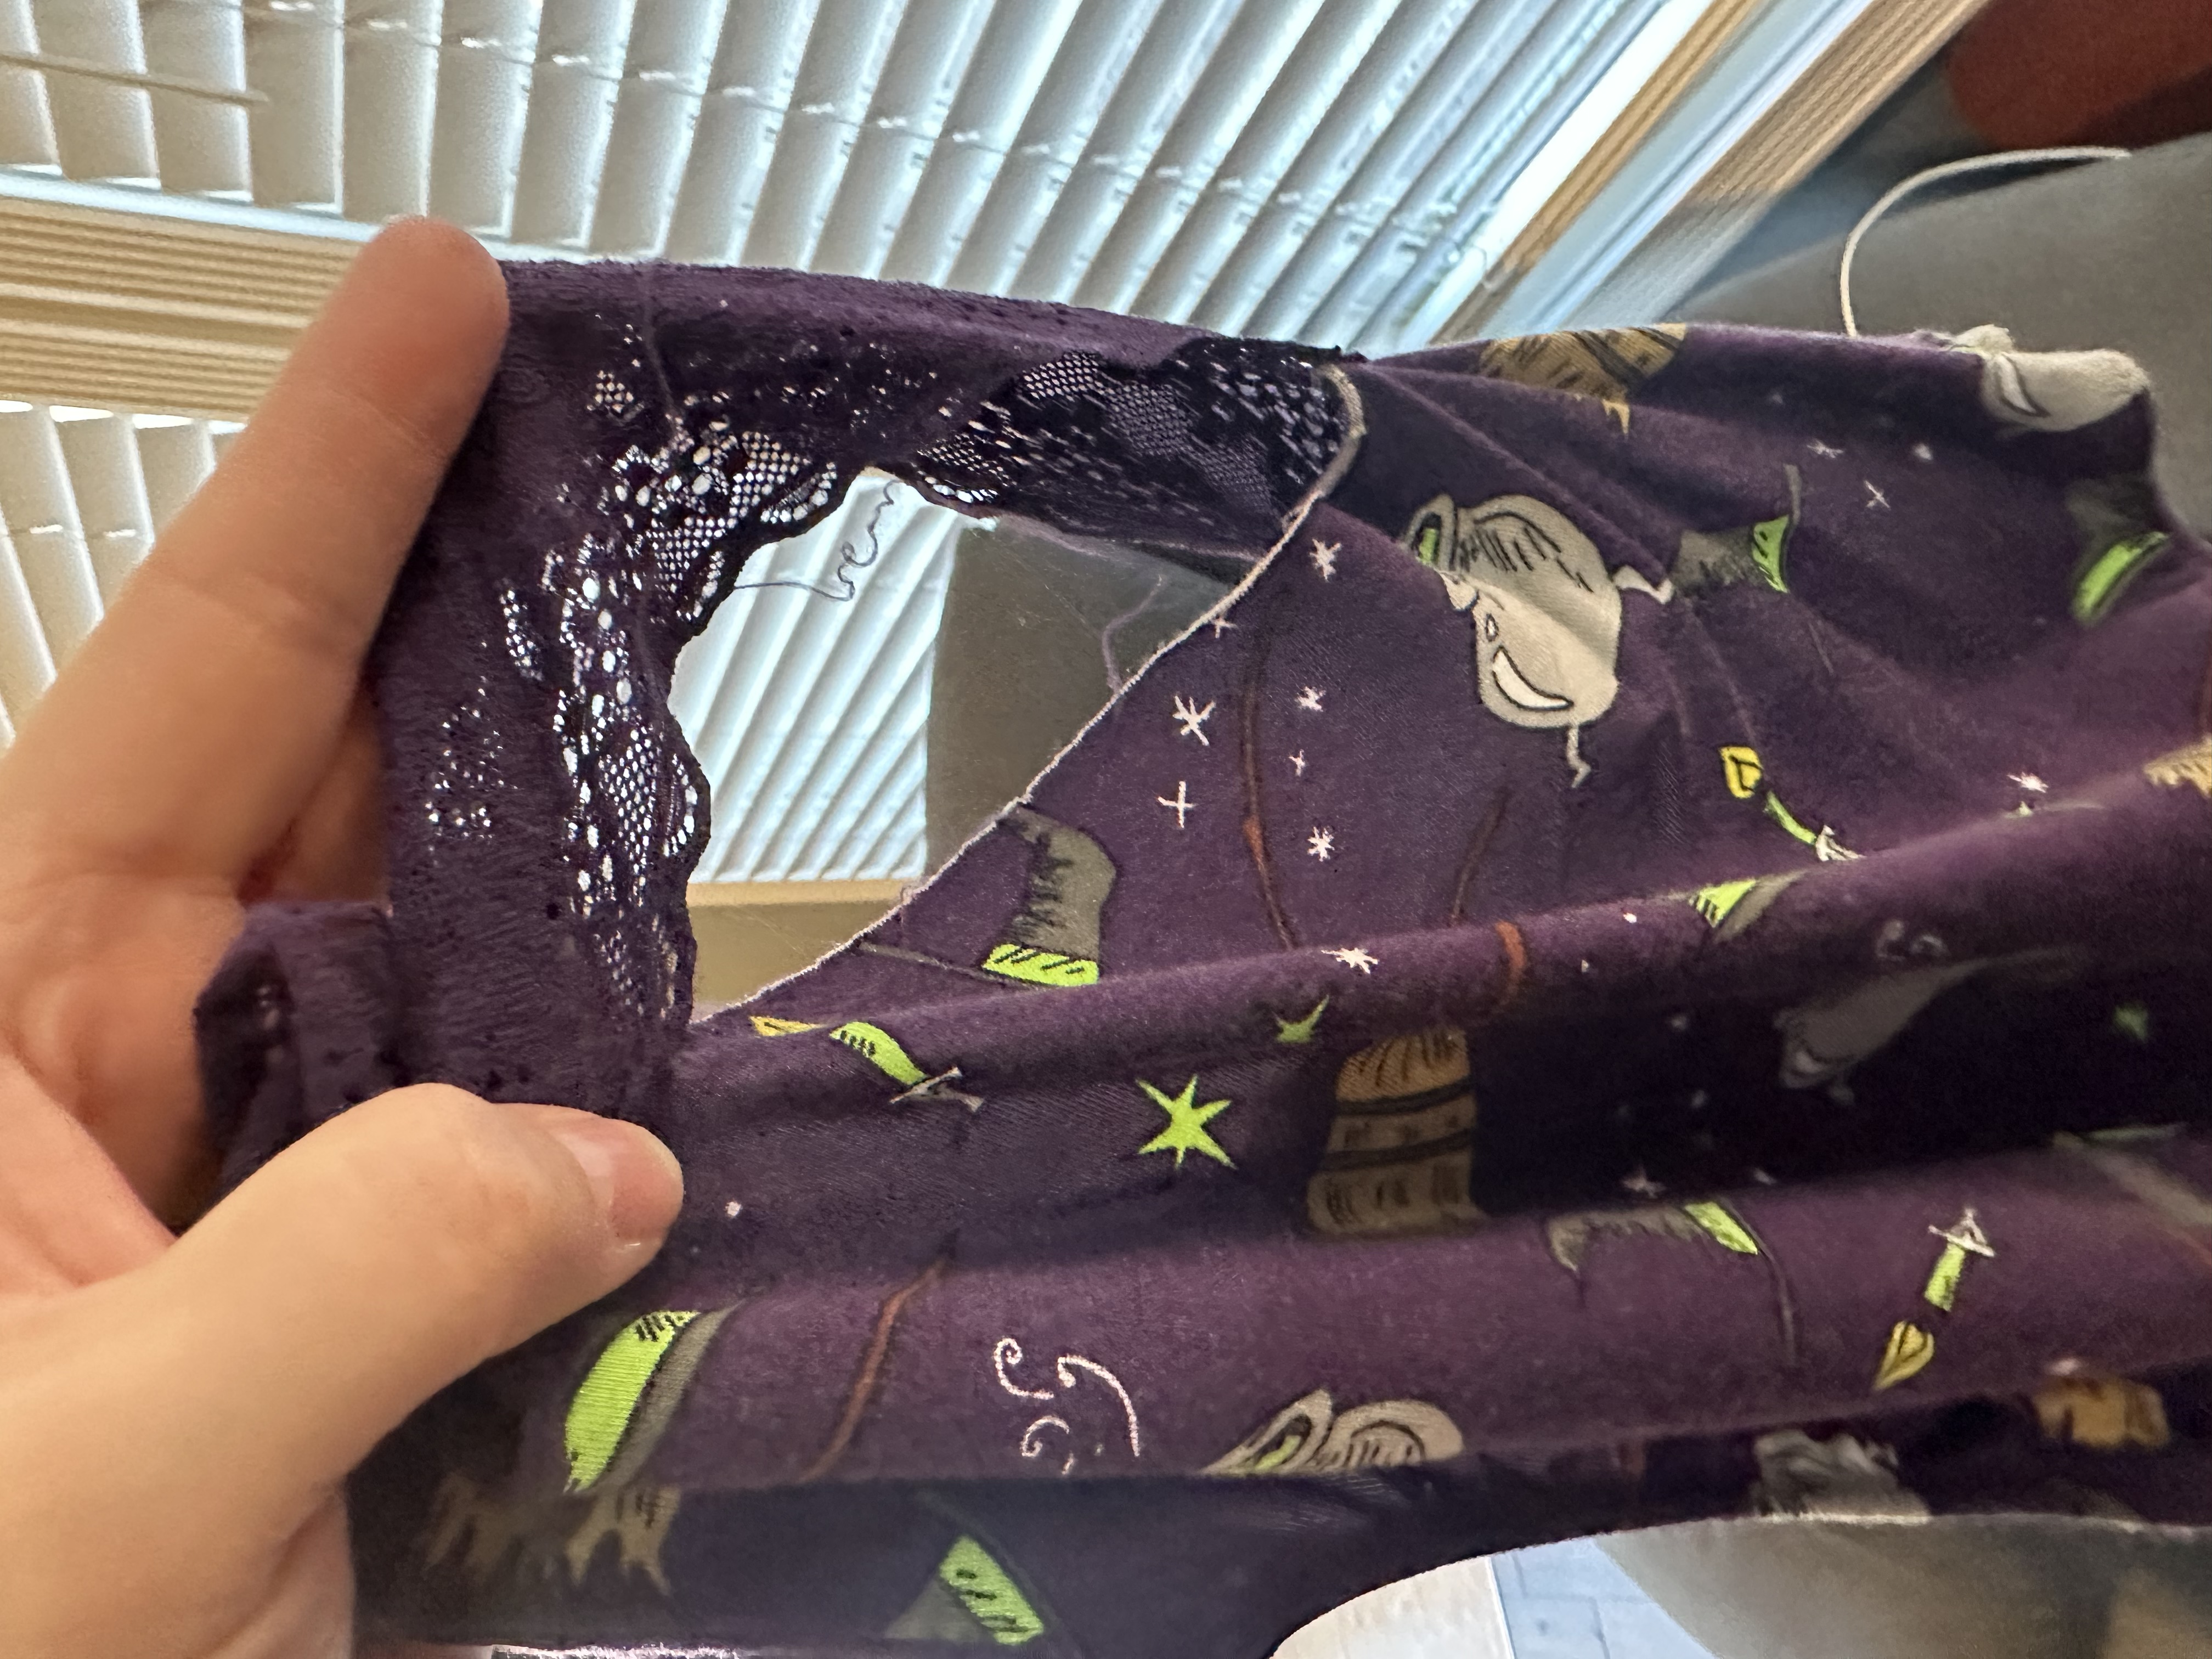 MeUndies Review: How do the printed underwear hold up in real life